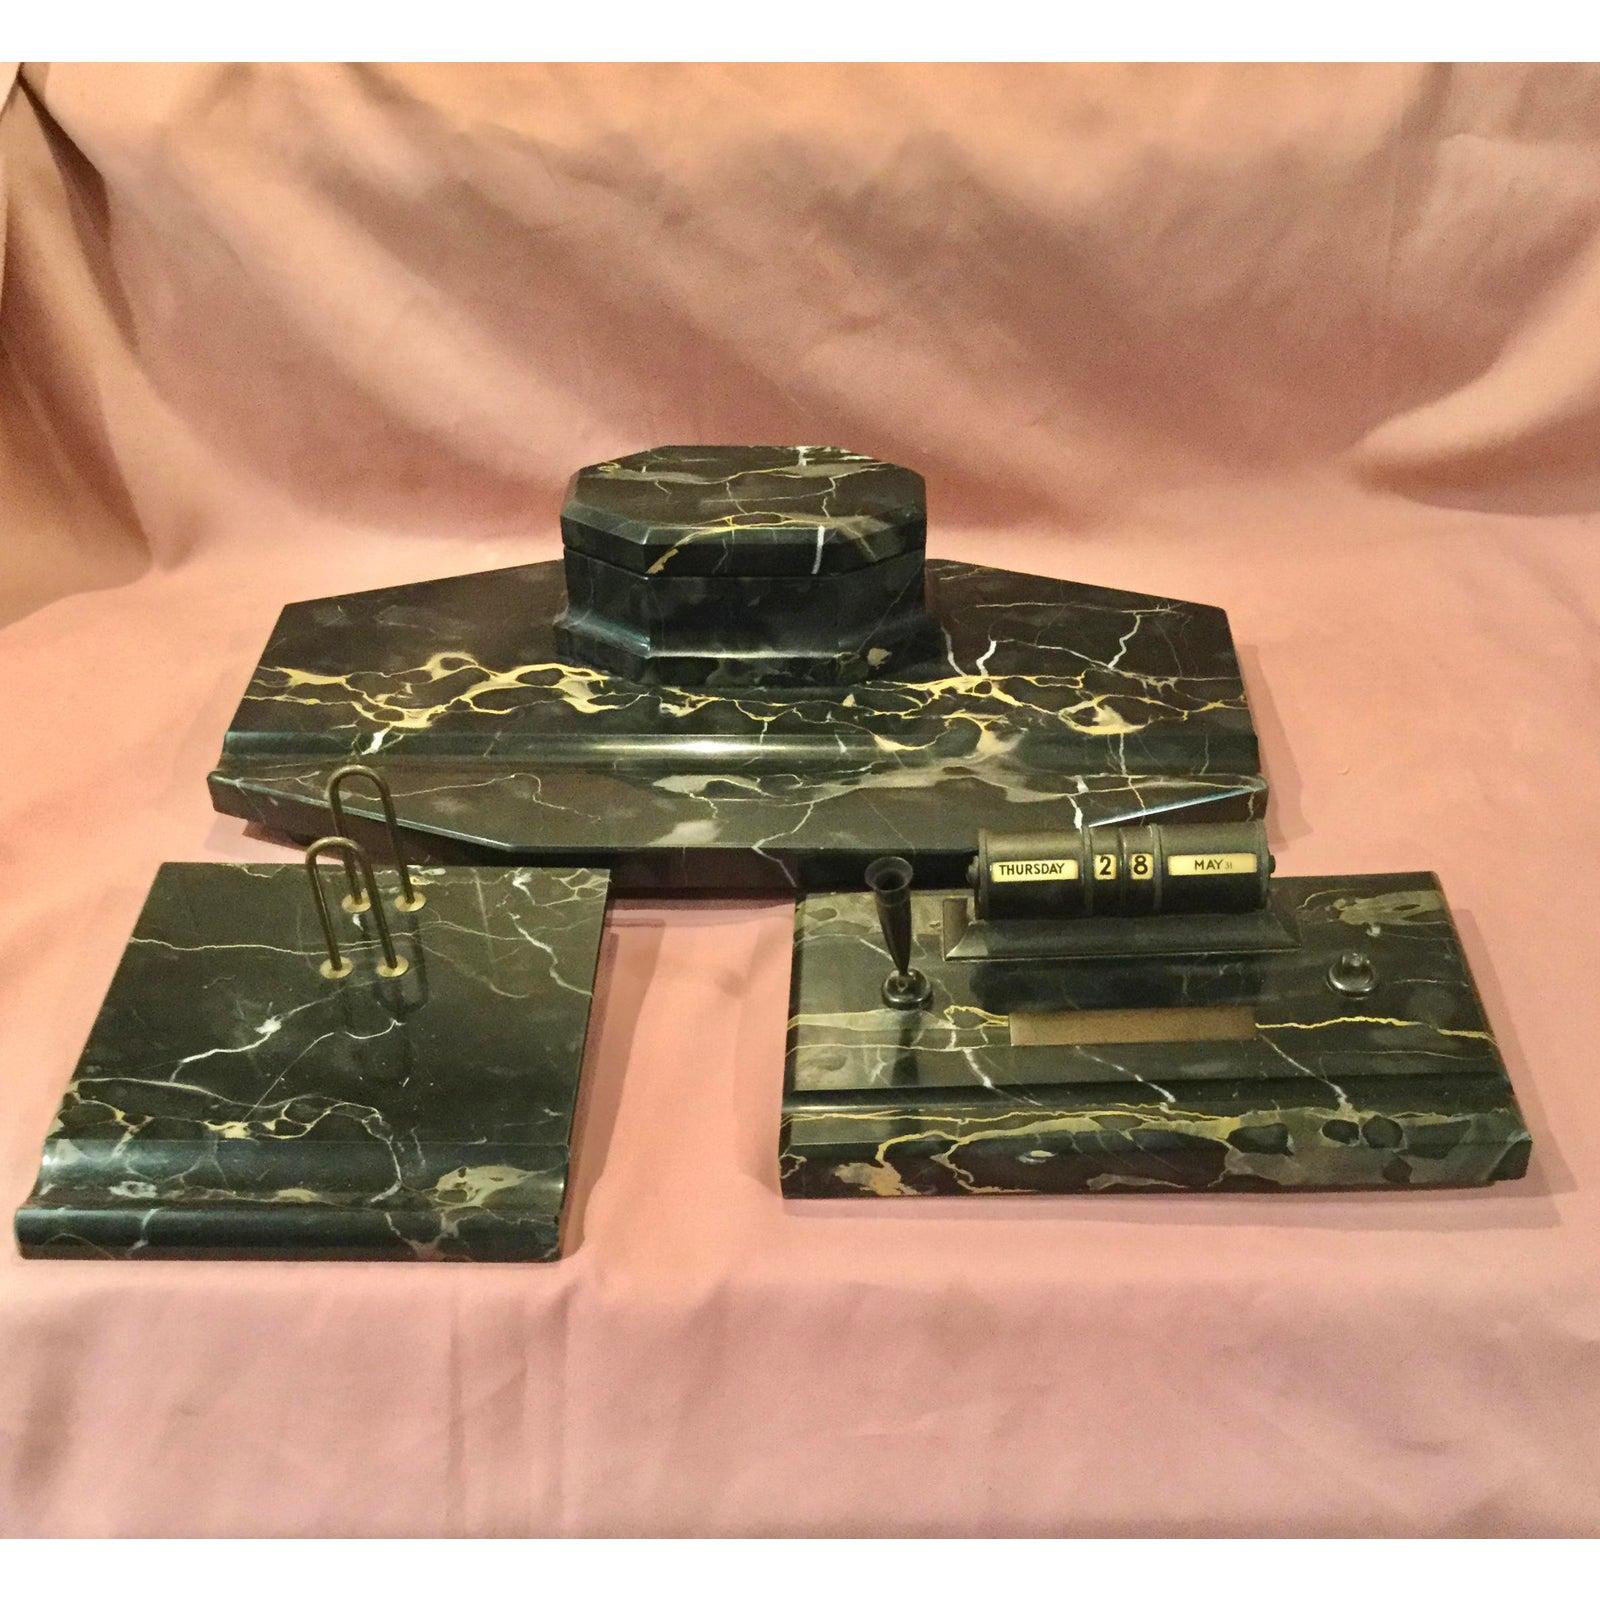 An outstanding large desk set made of the beautiful Portoro marble and brass from Italy. There are large pen trays and the glass inkwells that are original and perfect. Marble is black with a Carmel color running through it. Stamped Italy.
There is